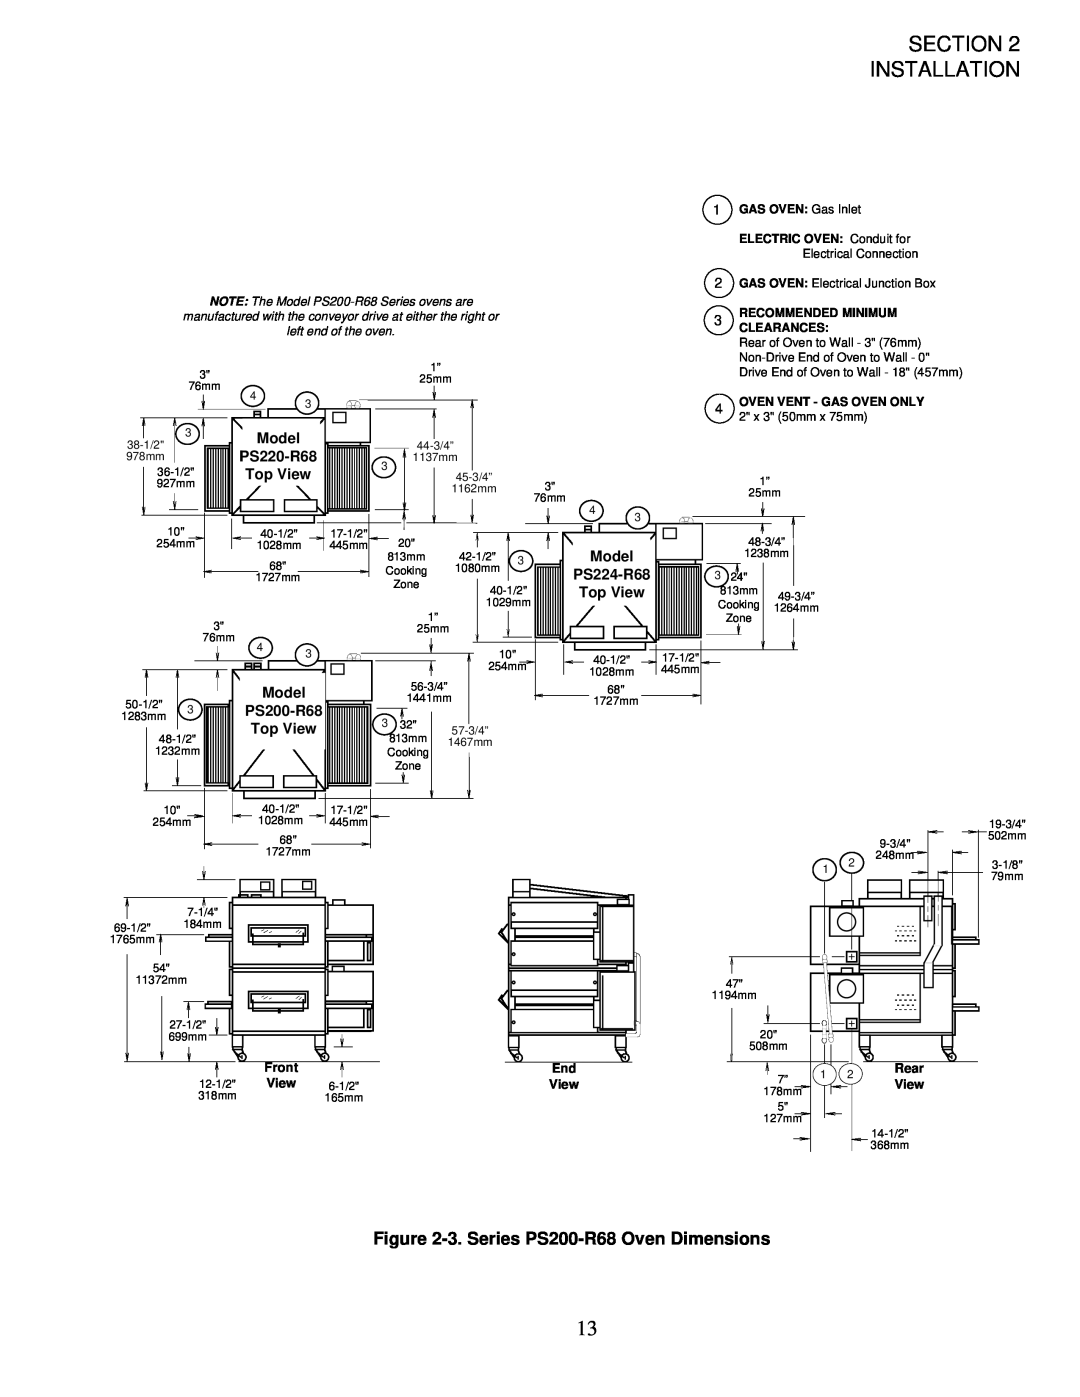 Middleby Marshall installation manual Section Installation, 3.Series PS200-R68Oven Dimensions, Model, Front, Rear, View 